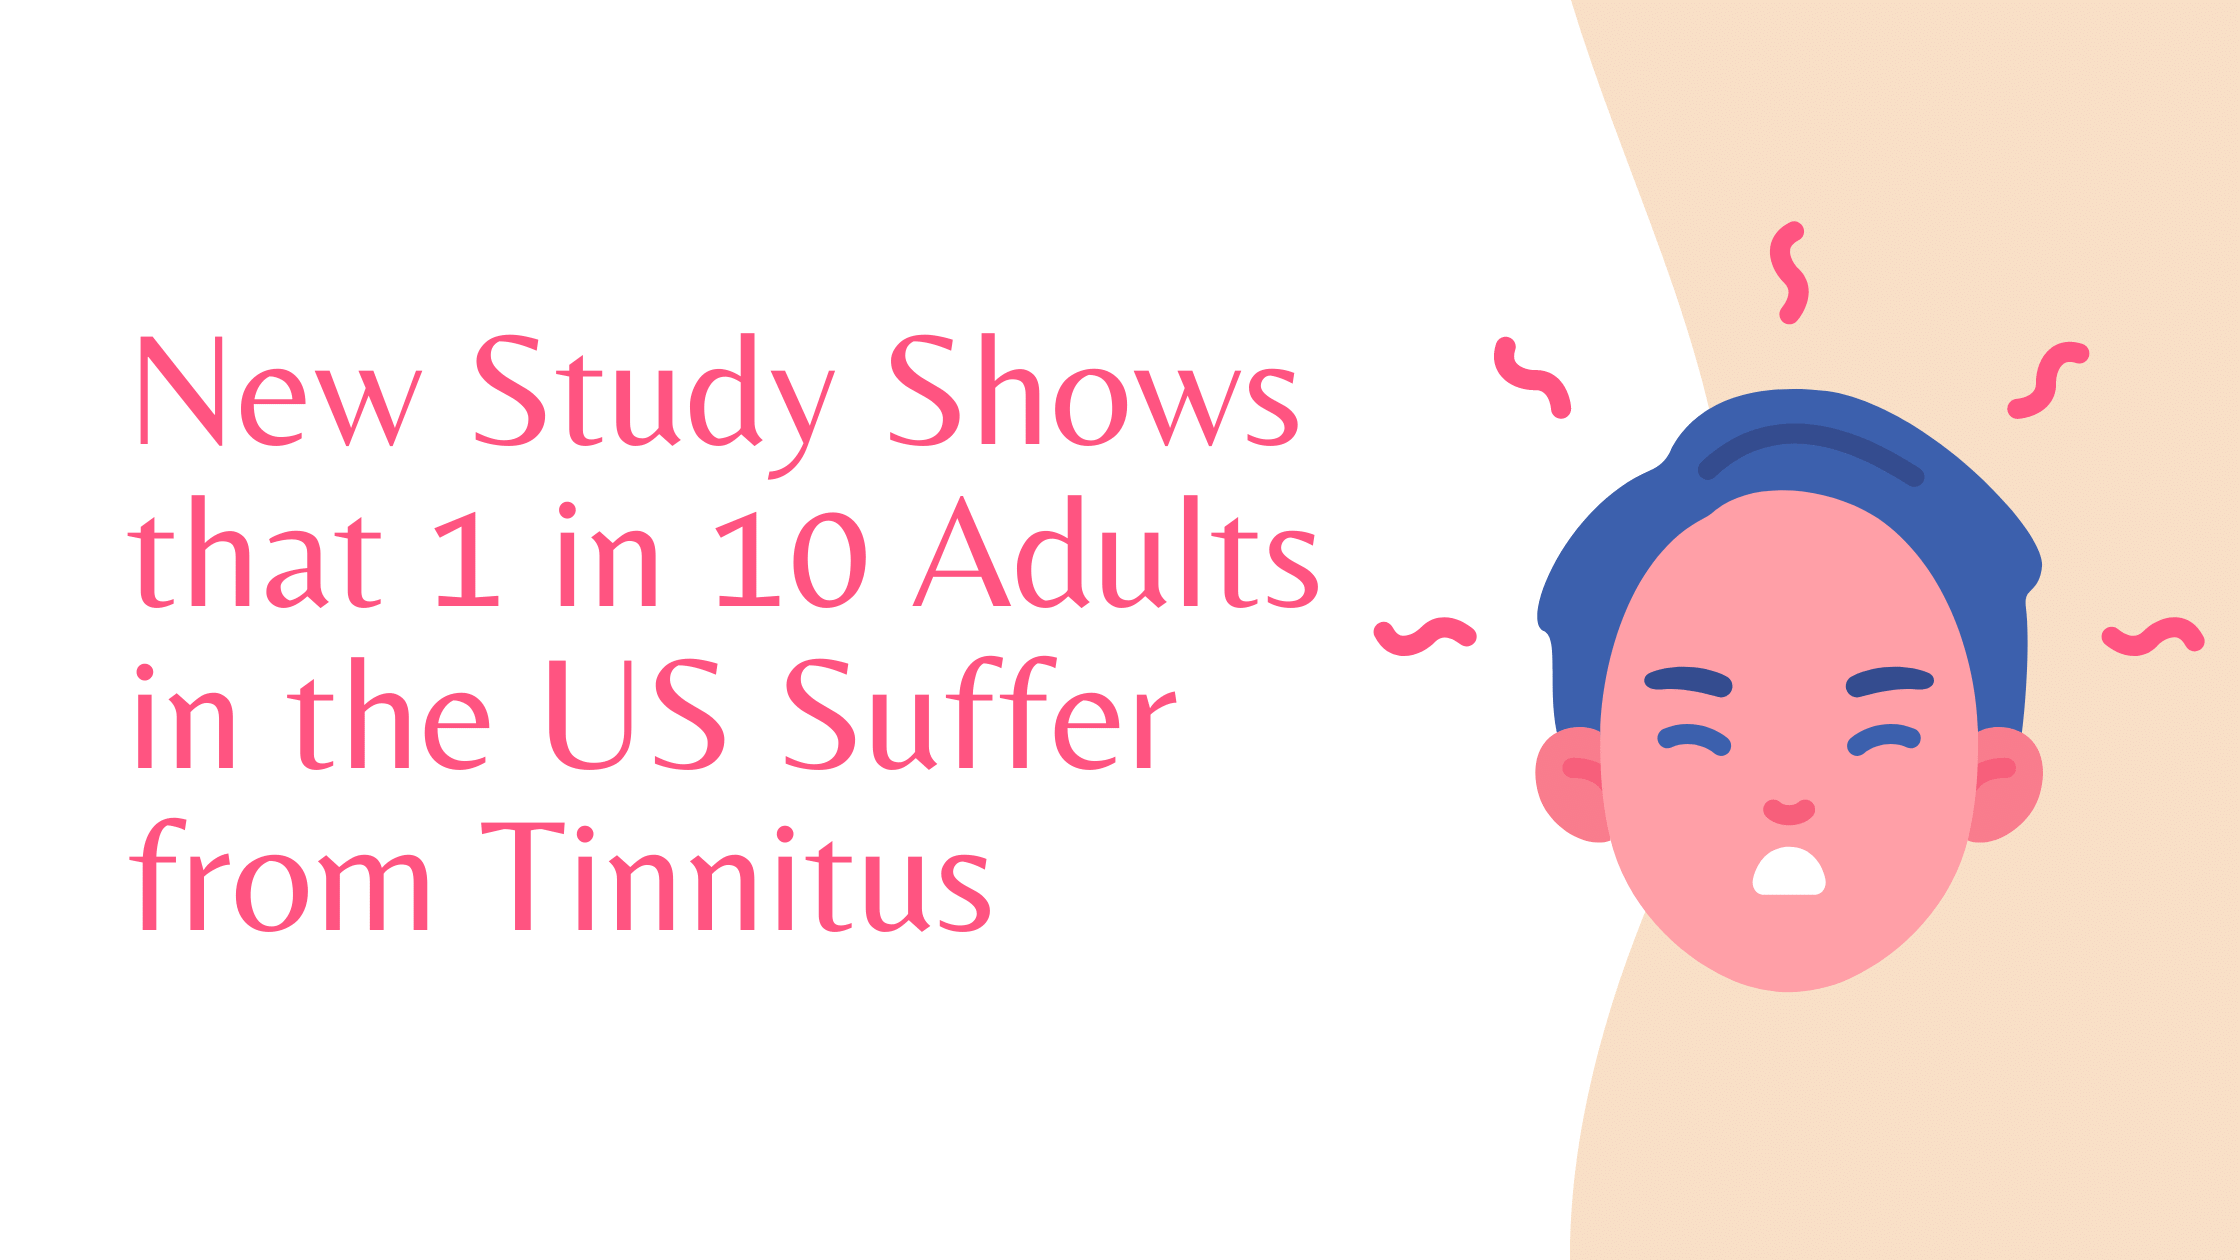 Featured image for “New Study Shows that 1 in 10 Adults in the US Suffer from Tinnitus”